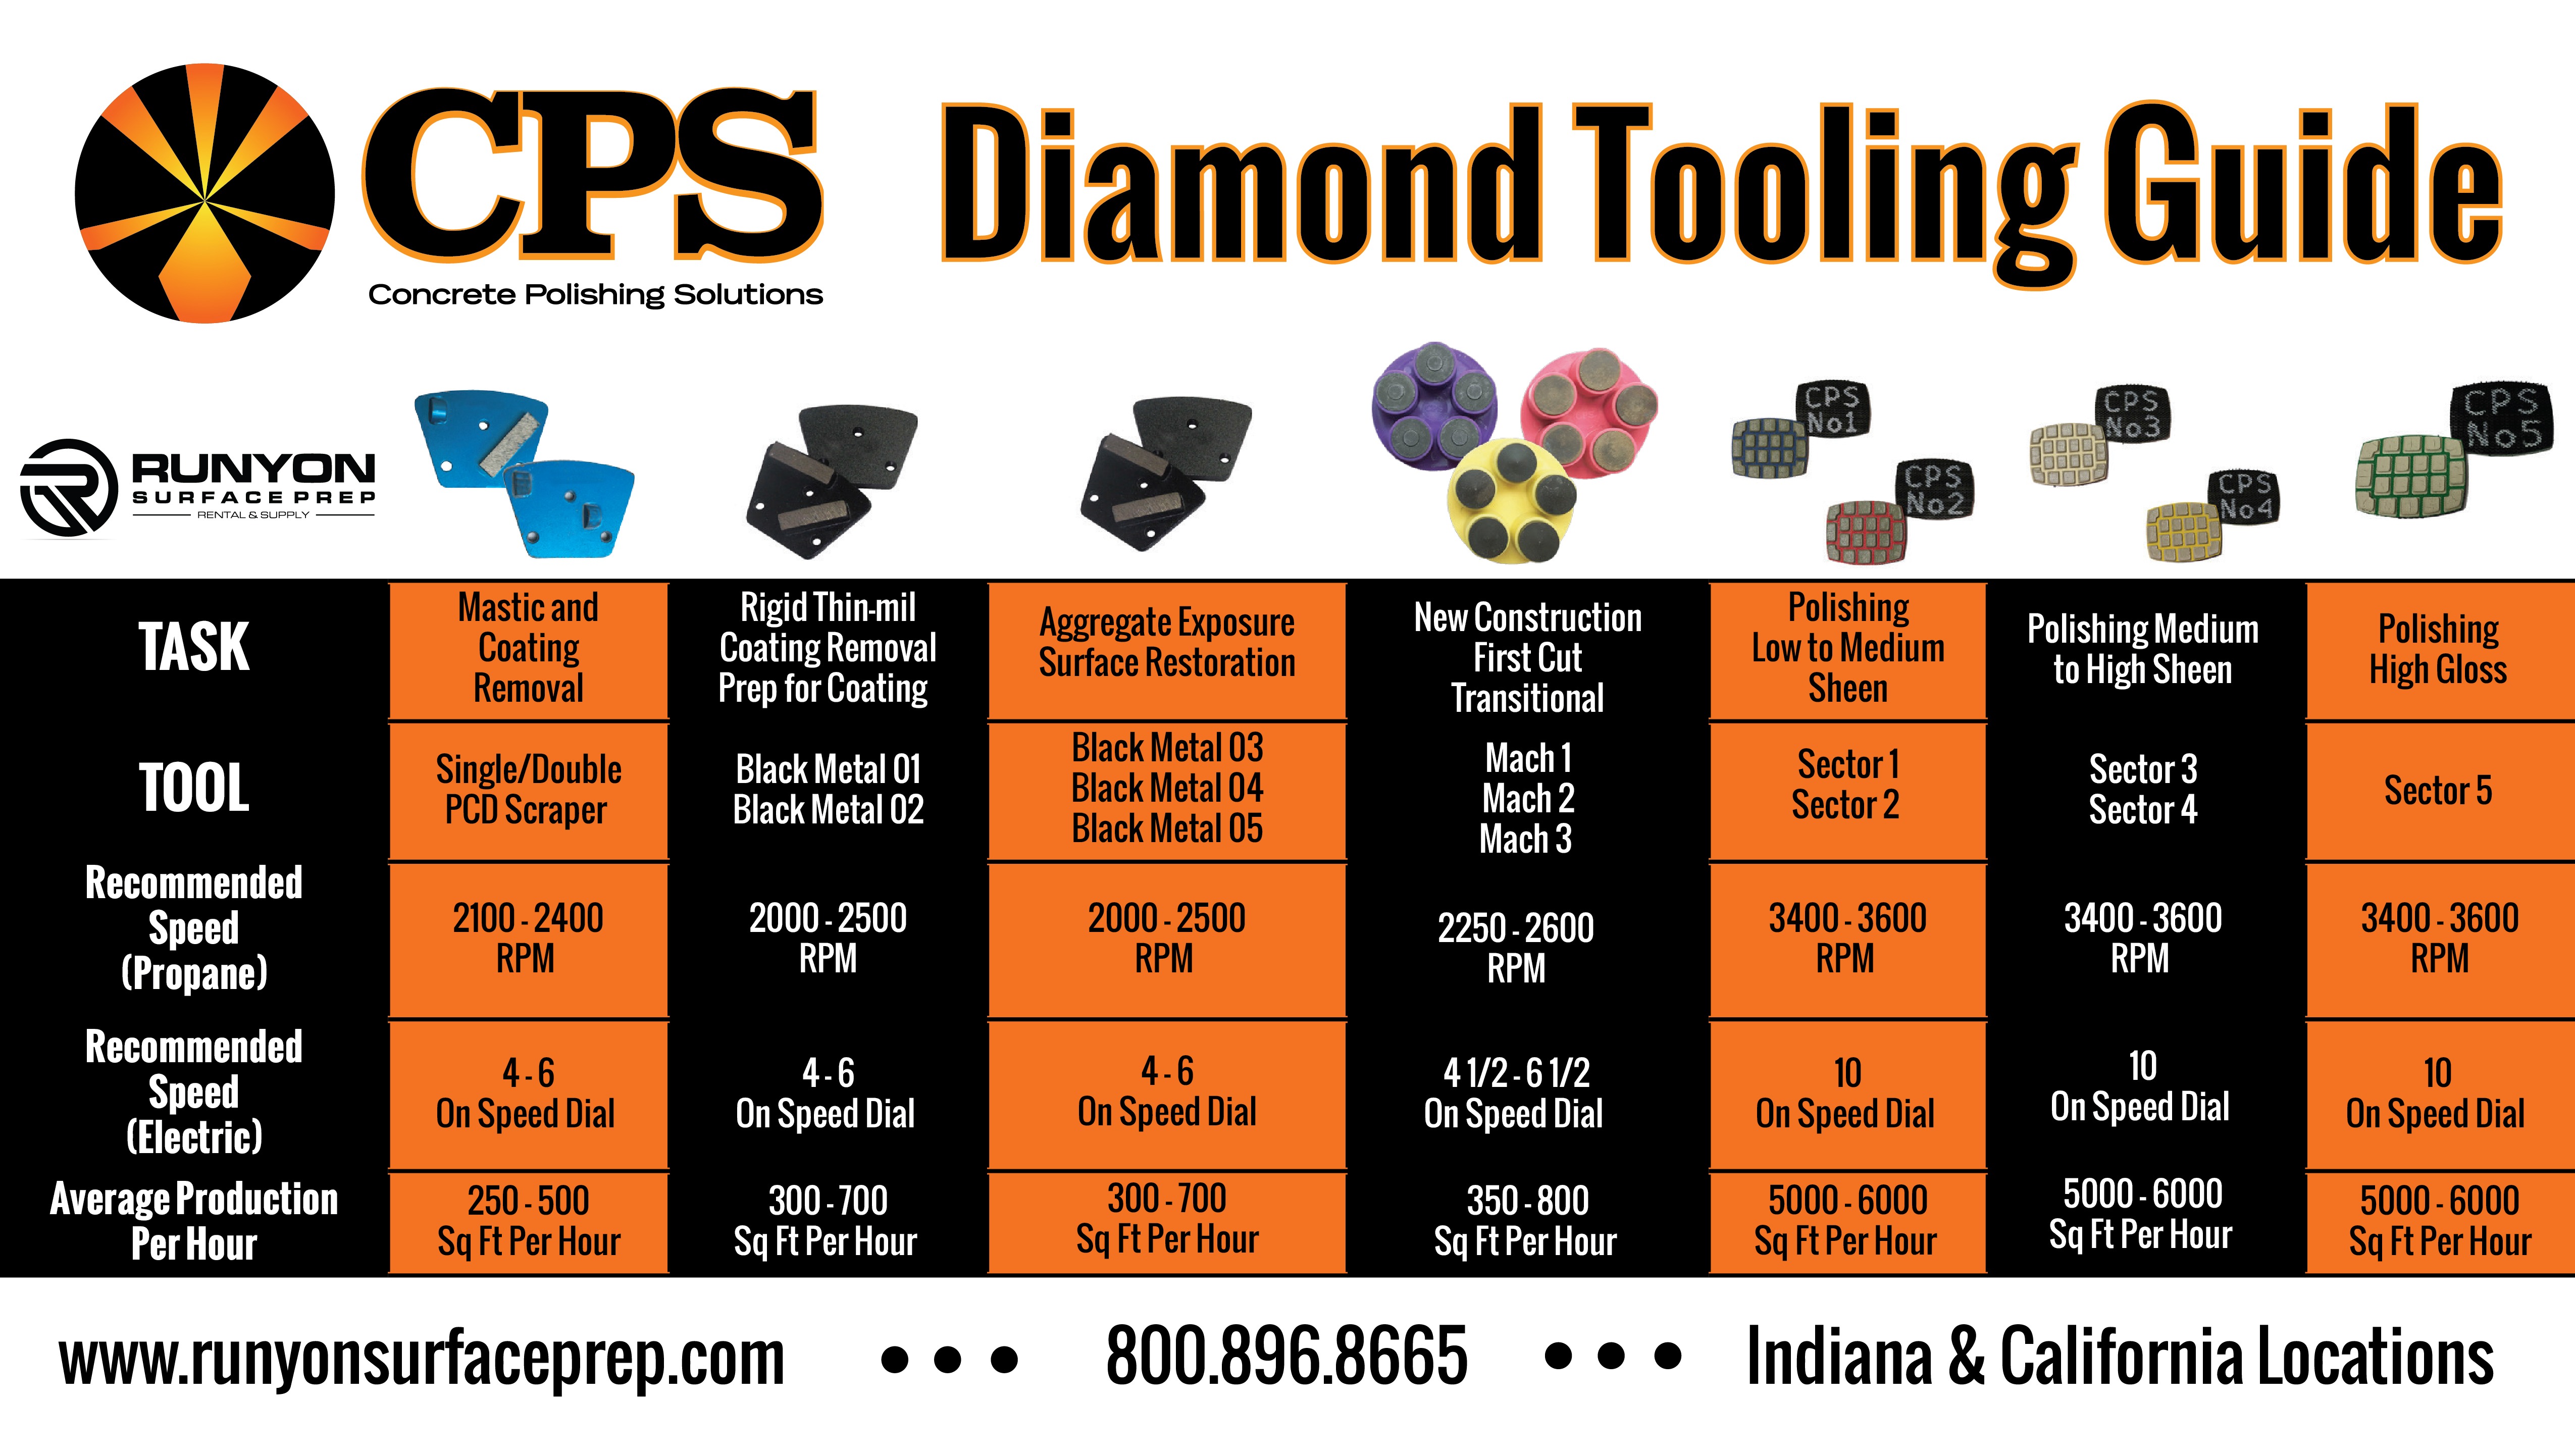 CPS Diamond Tooling Guide